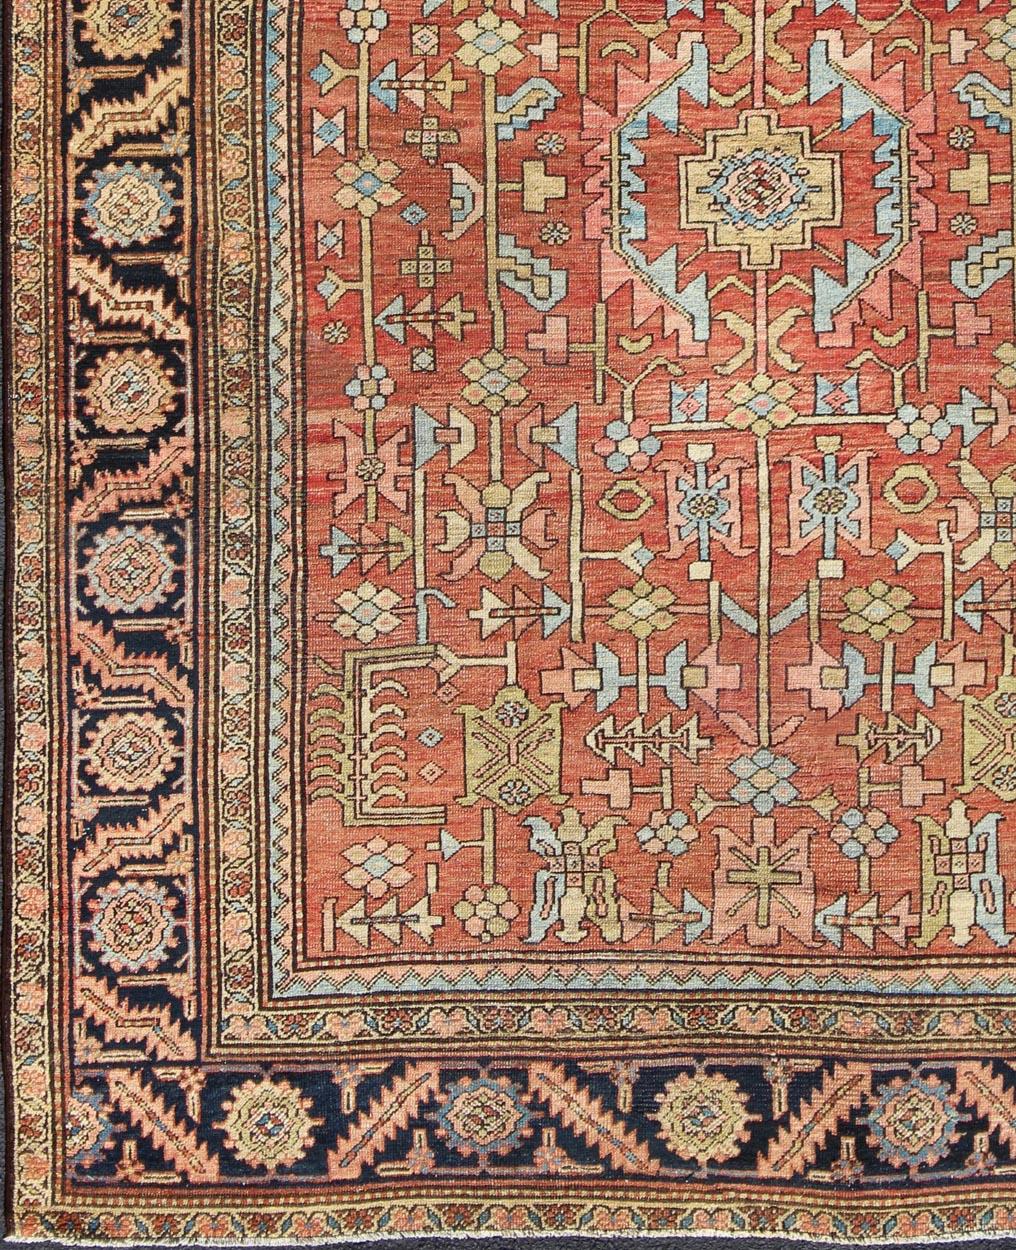 All-Over Geometric Design Antique Persian Serapi Rug. Keivan Woven Arts / rug /S12-0301, country of origin / type: Iran / Kerman , circa 1890.

Measures: 9'5 x 12'8.

This antique Persian Serapi from late 19th century displays a charming and rich